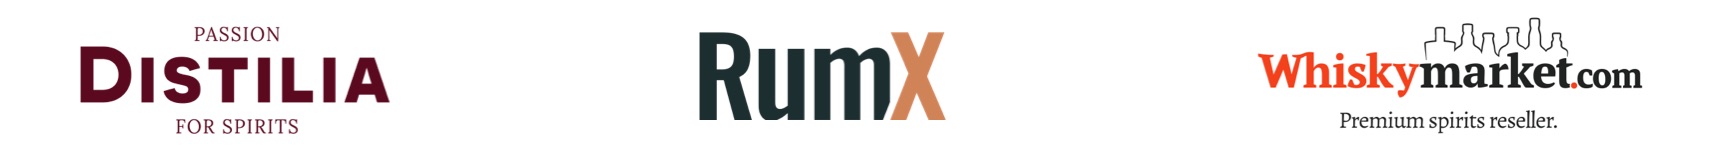 Decorative banner visualization for the distilia and RumX cooperation